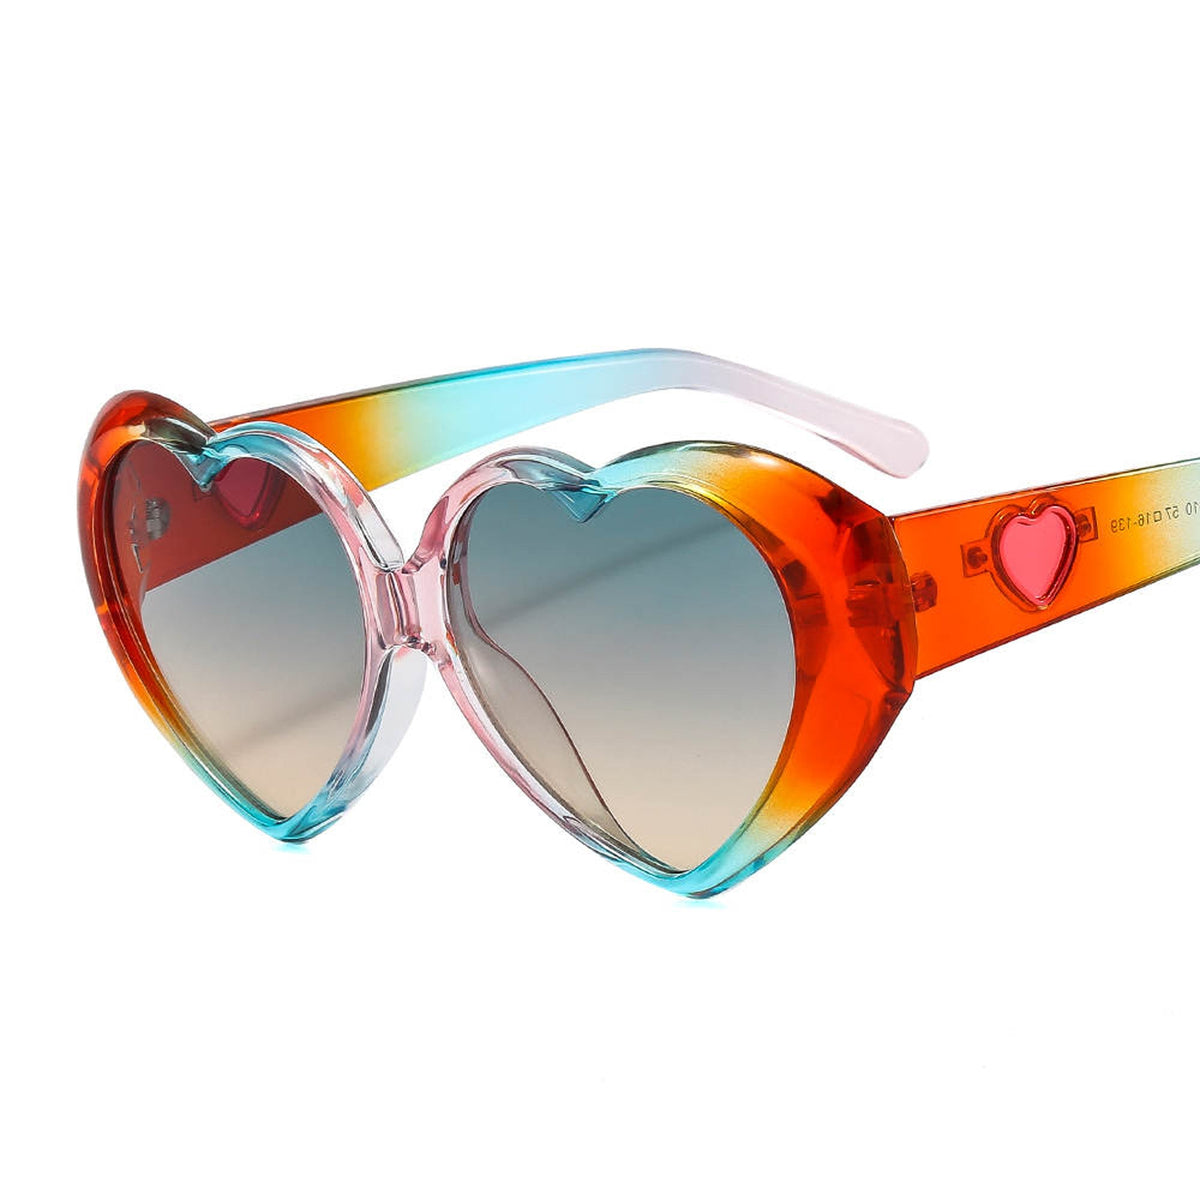 Taizhou Two Circles Trading Co. Ltd. Costume Accessories Orange and Blue Shaped Sunglasses for Adults 810077658017